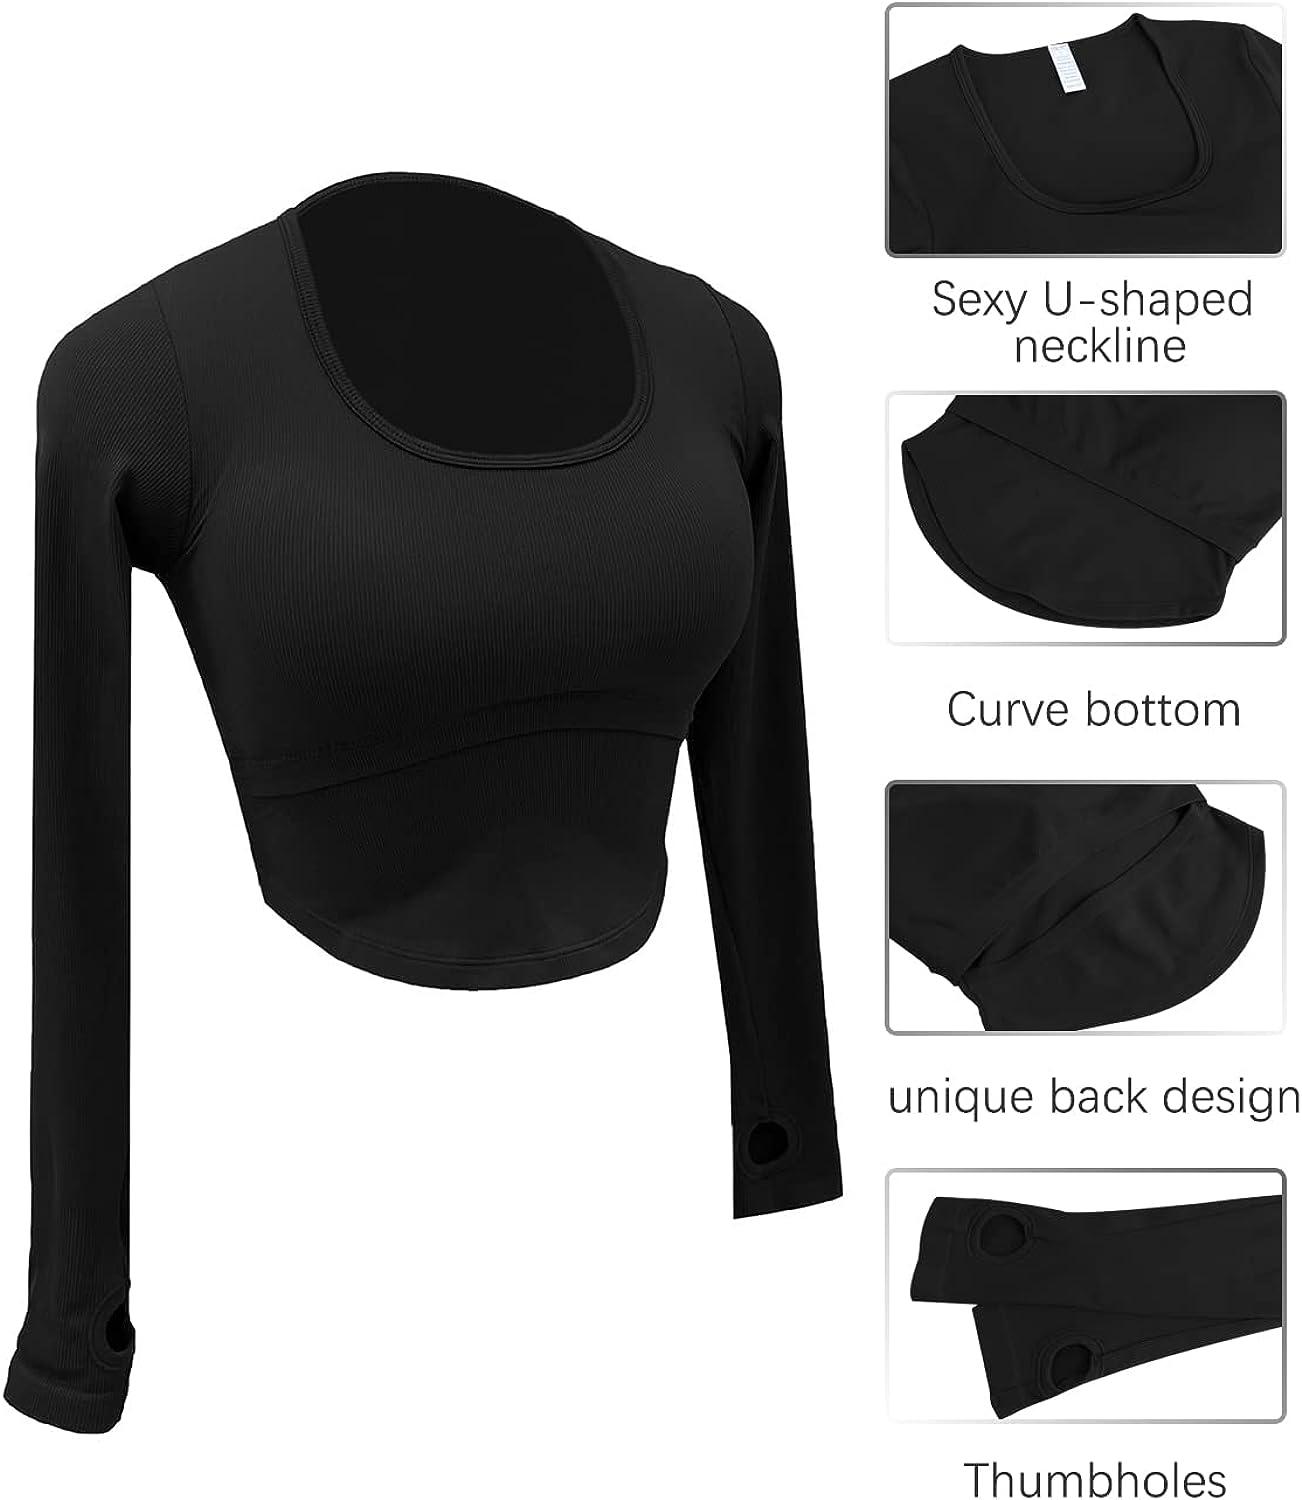 The Best Long Sleeve Yoga Tops With Open Backs